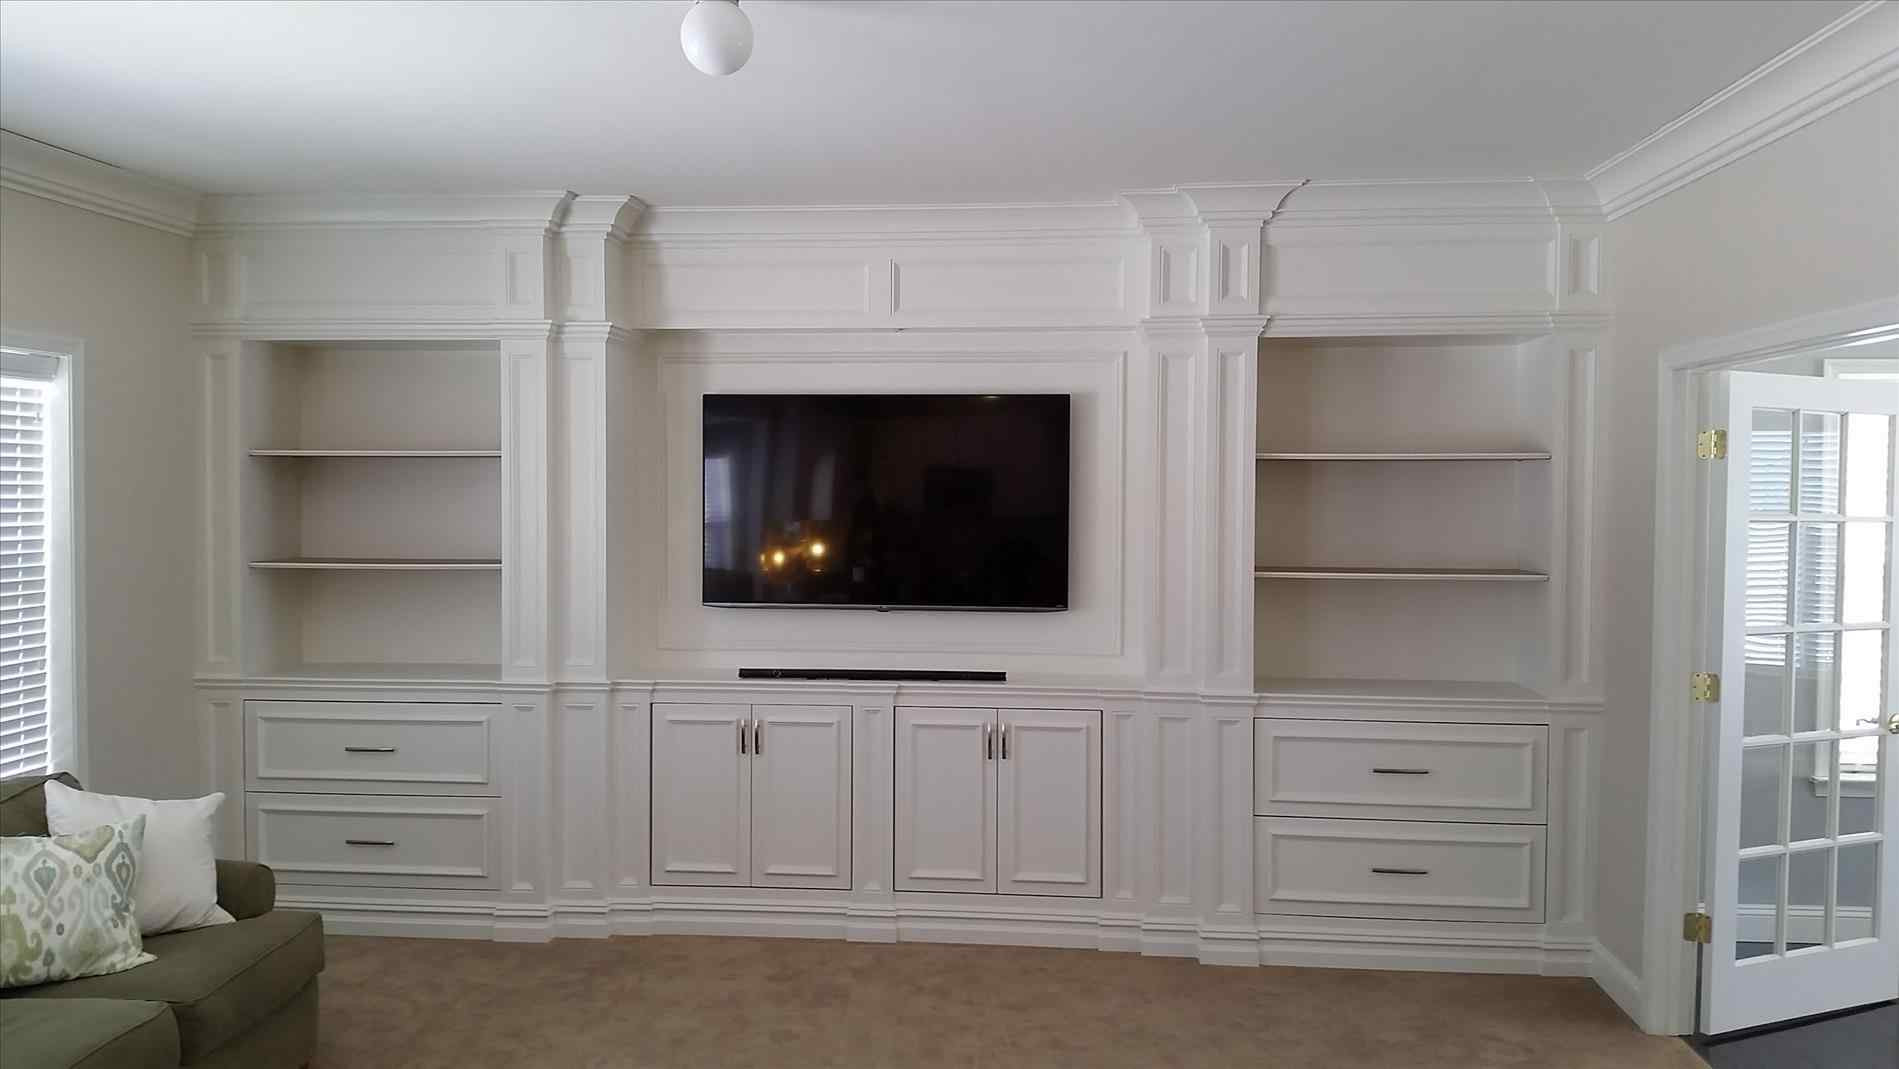 Built In Cabinet Designs Bedroom
 Built In Bookcase Around Bed Buethe